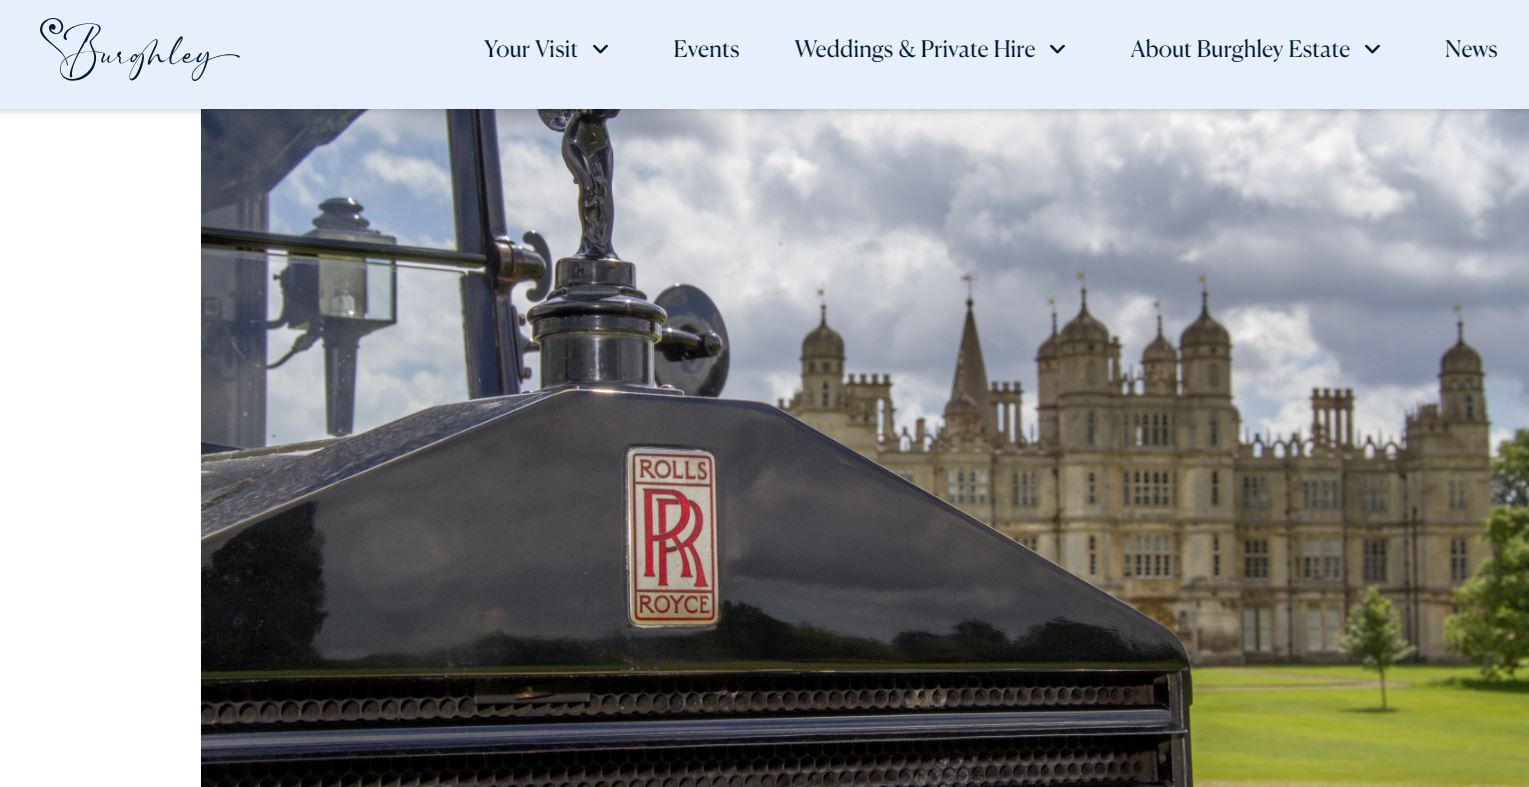 Rolls Royce Rally at Burghley House Evoke Classics classic cars online auction Events